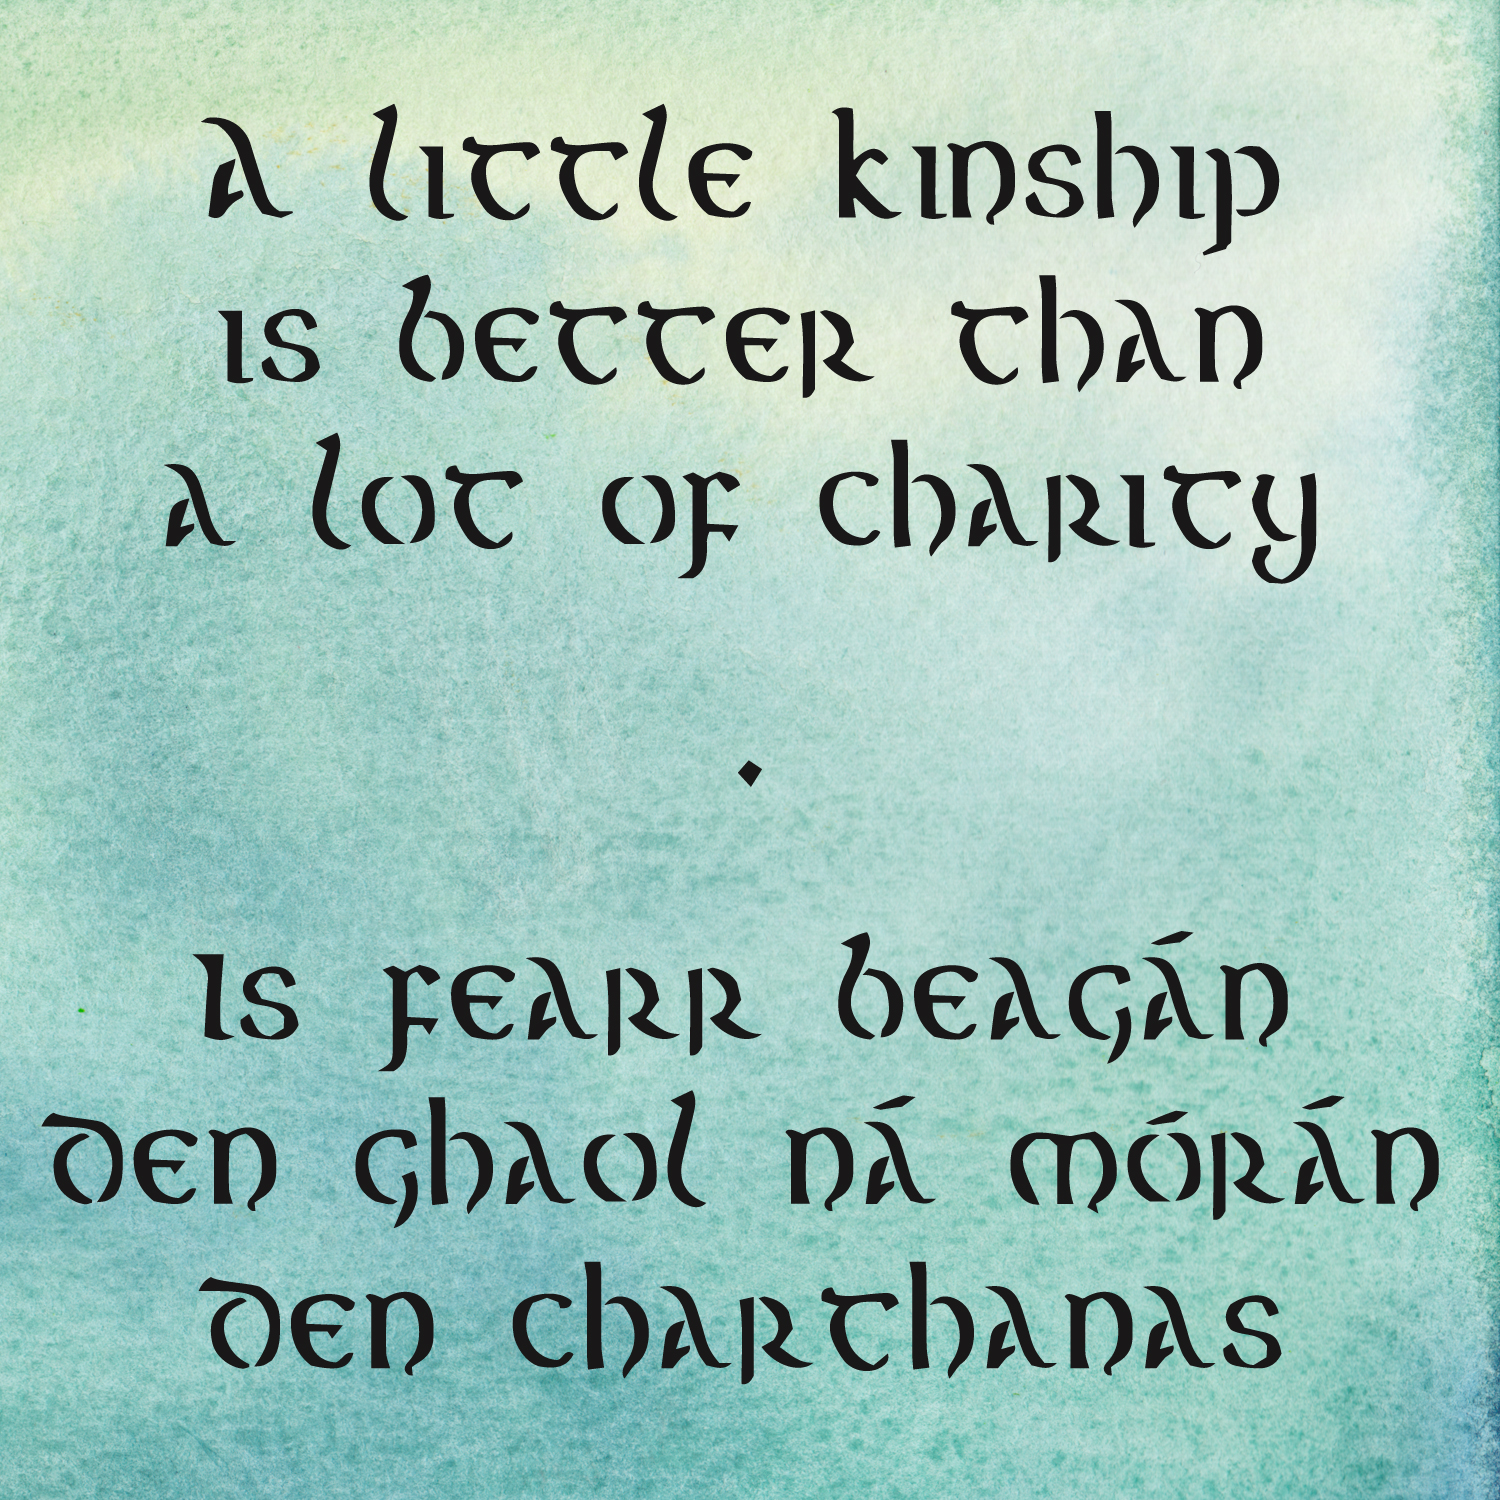 a little kinship is better than a lot of charity Irish quotes on kinship